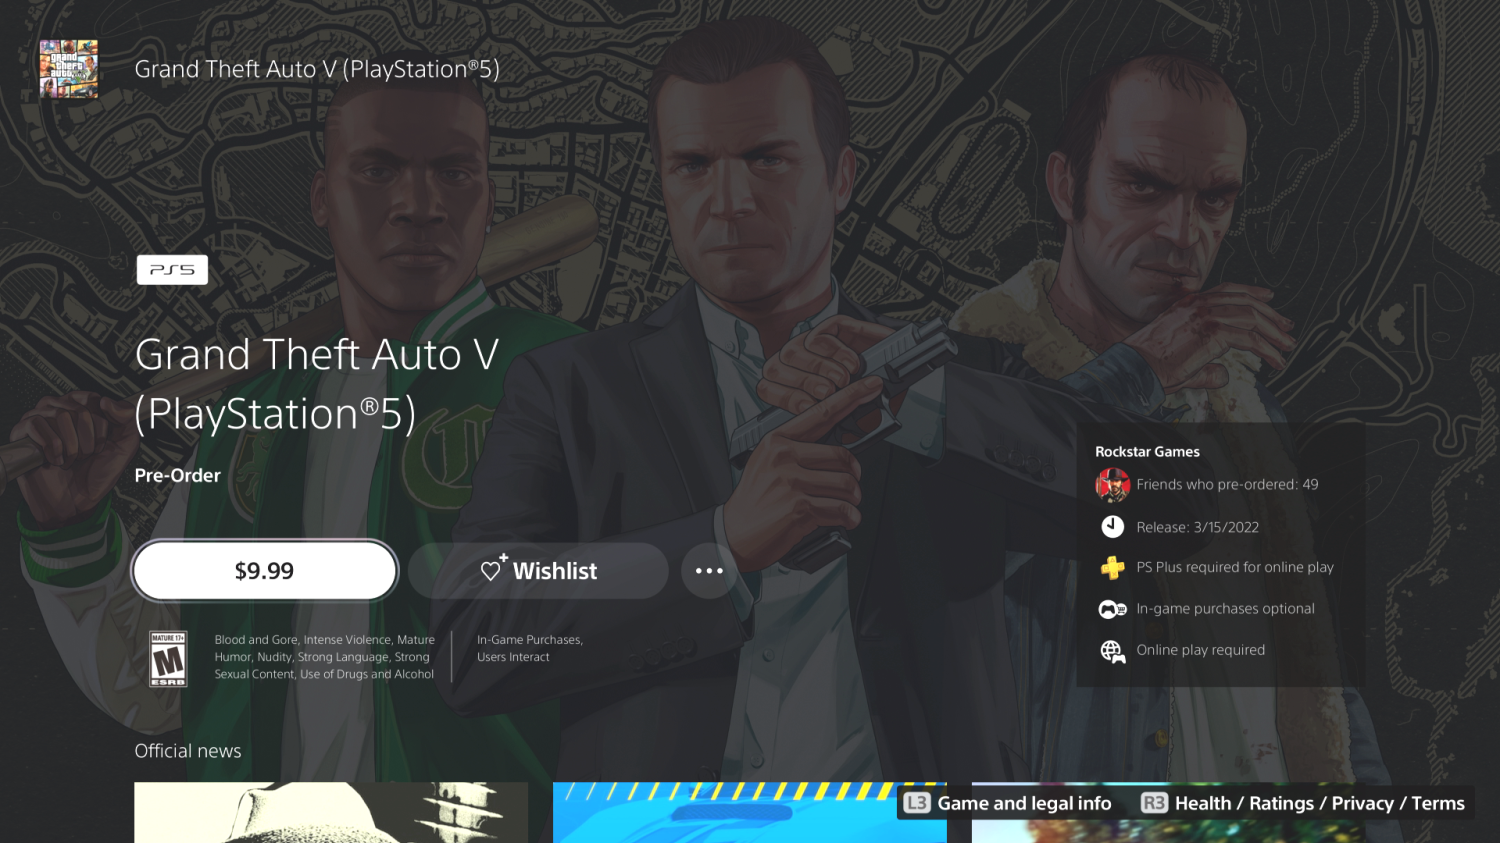 https://static.tweaktown.com/news/8/4/84968_5_grand-theft-auto-is-only-10-on-ps5-and-20-xbox-series_full.png